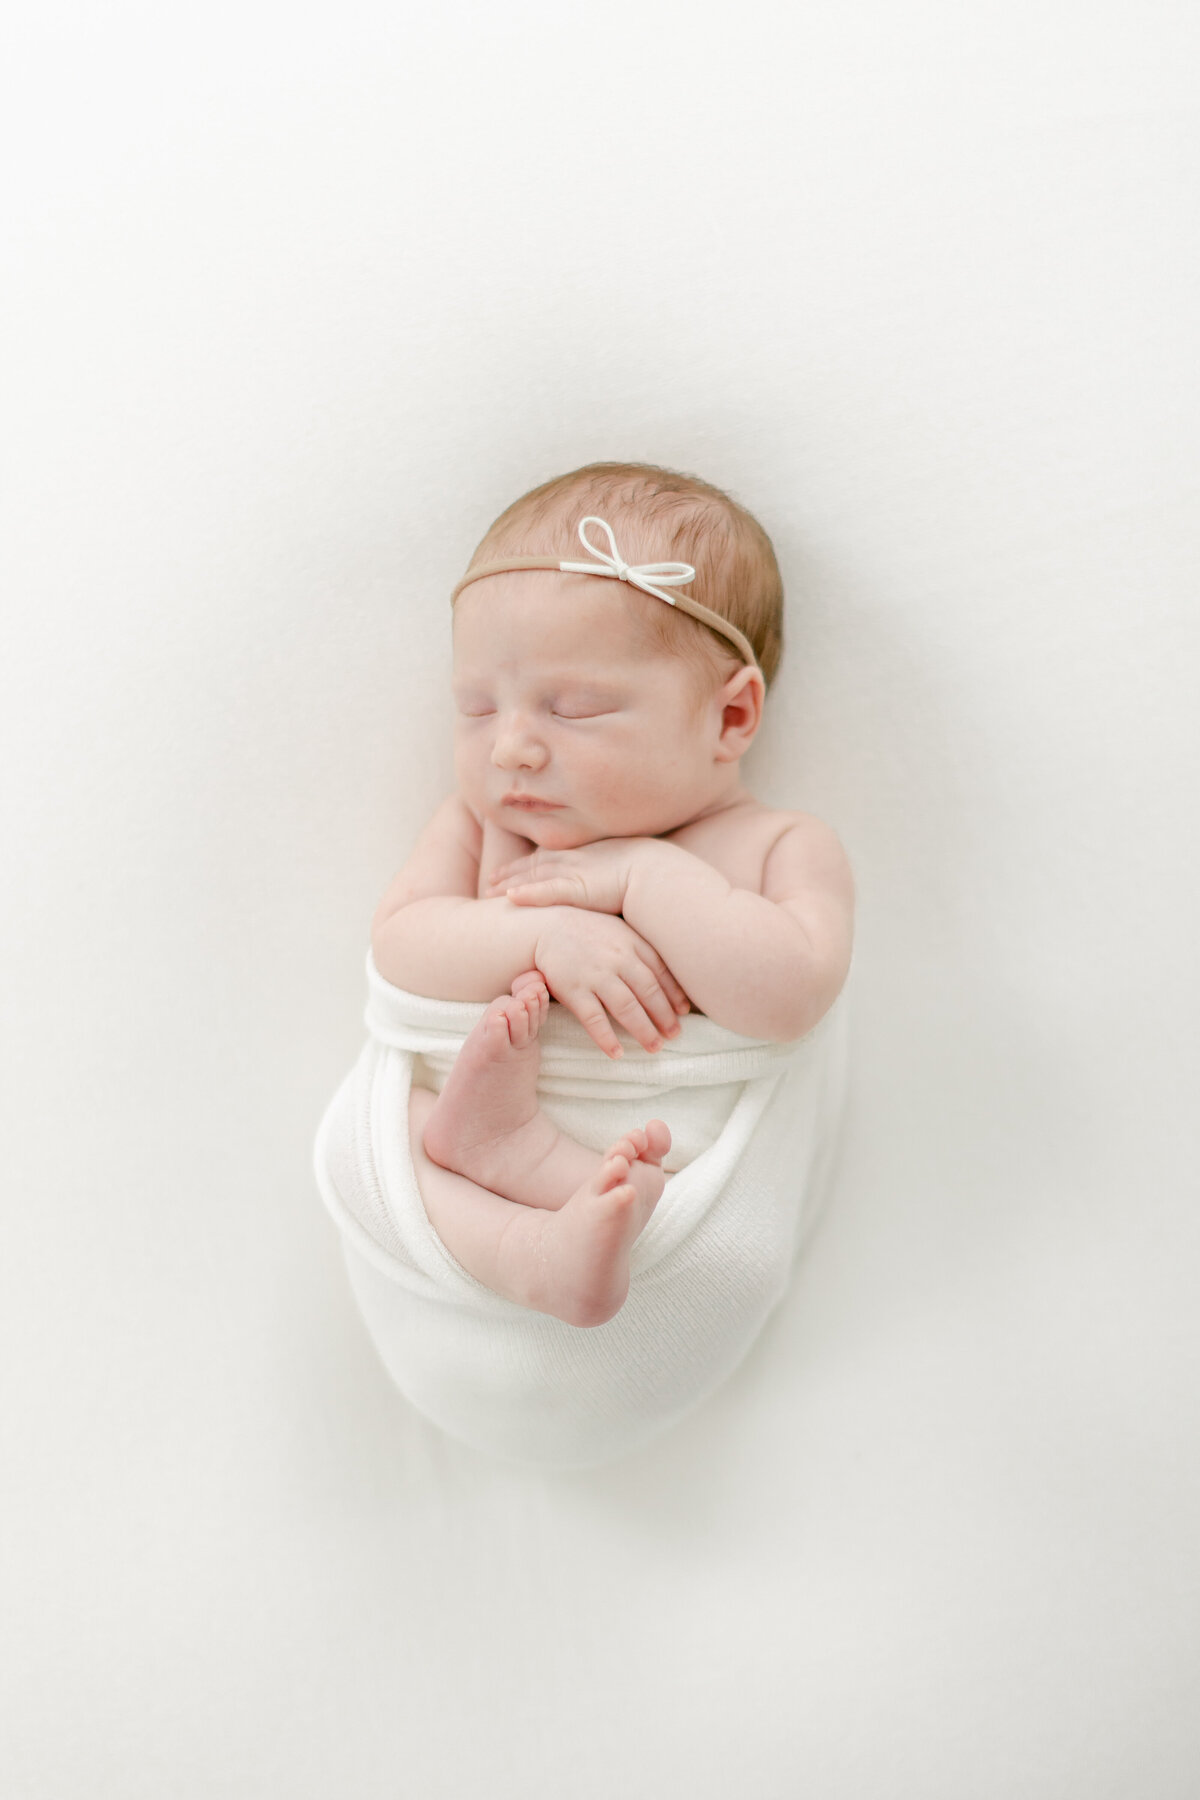 angelic newborn baby girl wrapped in white swaddle wearing a dainty headband for her newborn session photographed by Philadelphia Newborn Photographer Tara Federico